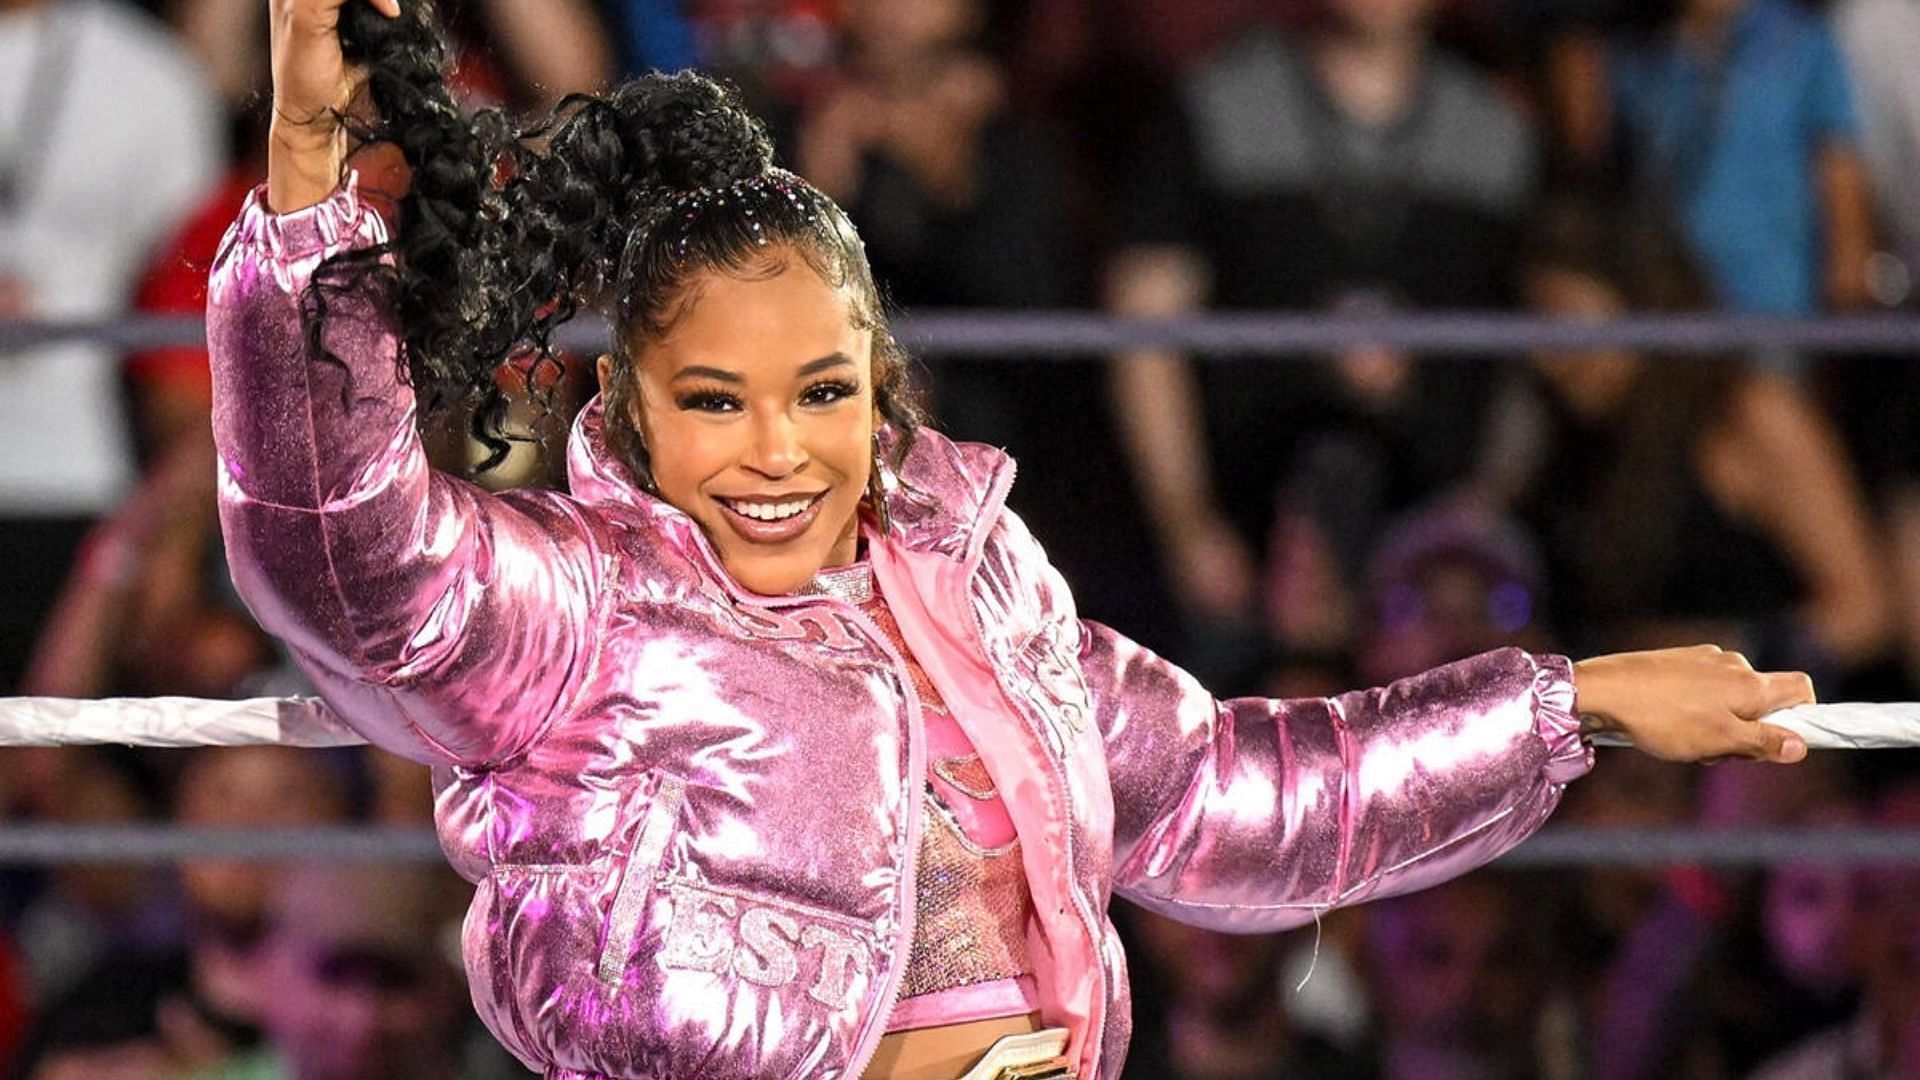 Bianca Belair may face some problems at Elimination Chamber